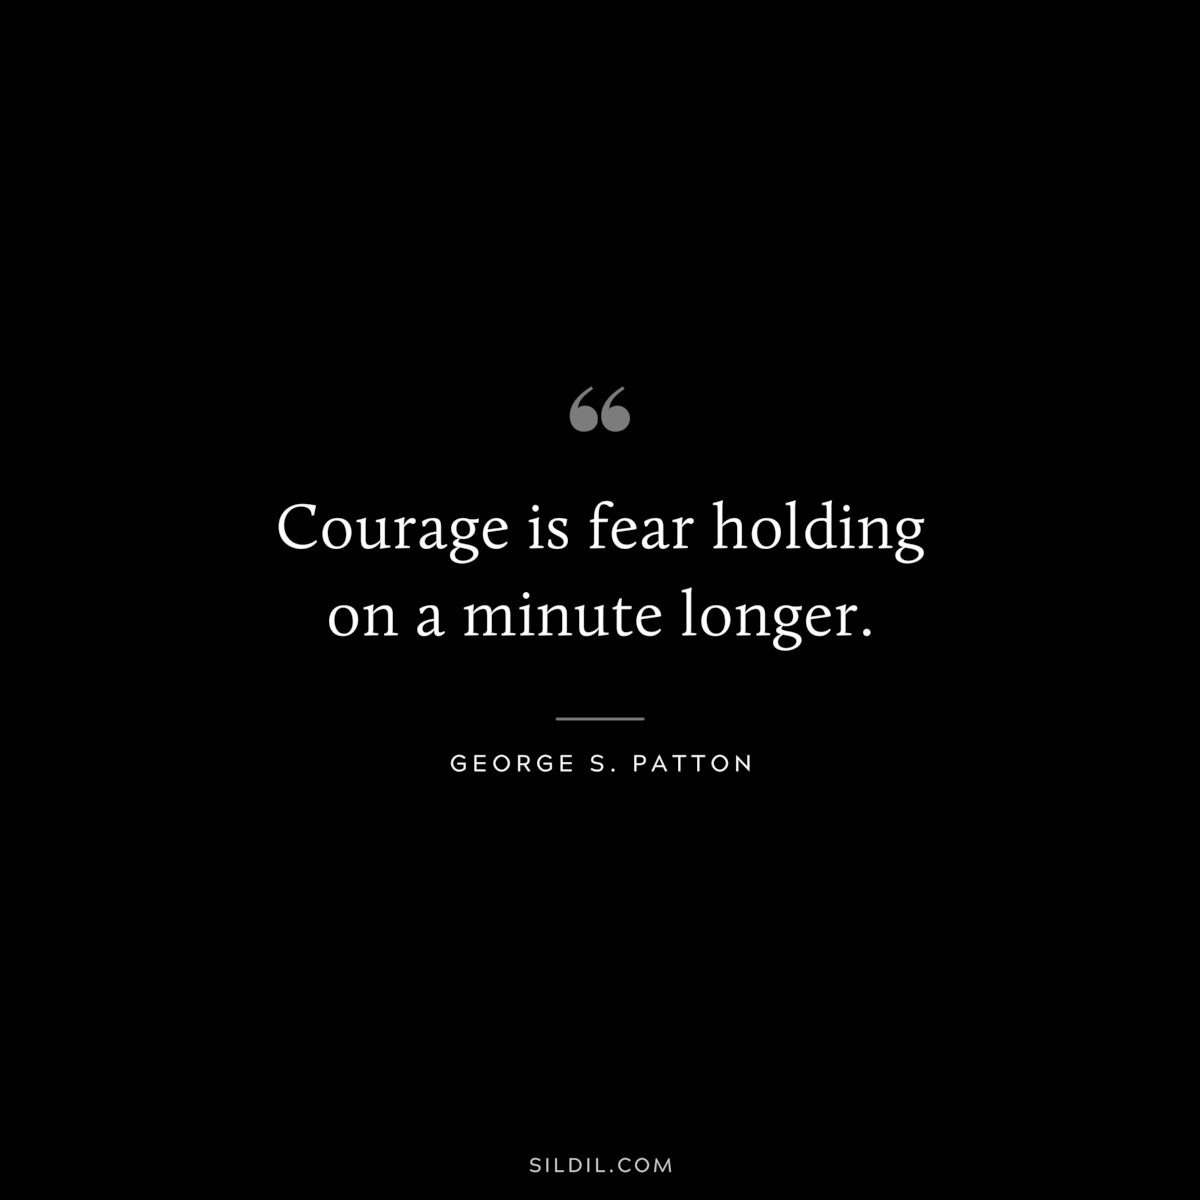 Courage is fear holding on a minute longer. ― George S. Patton